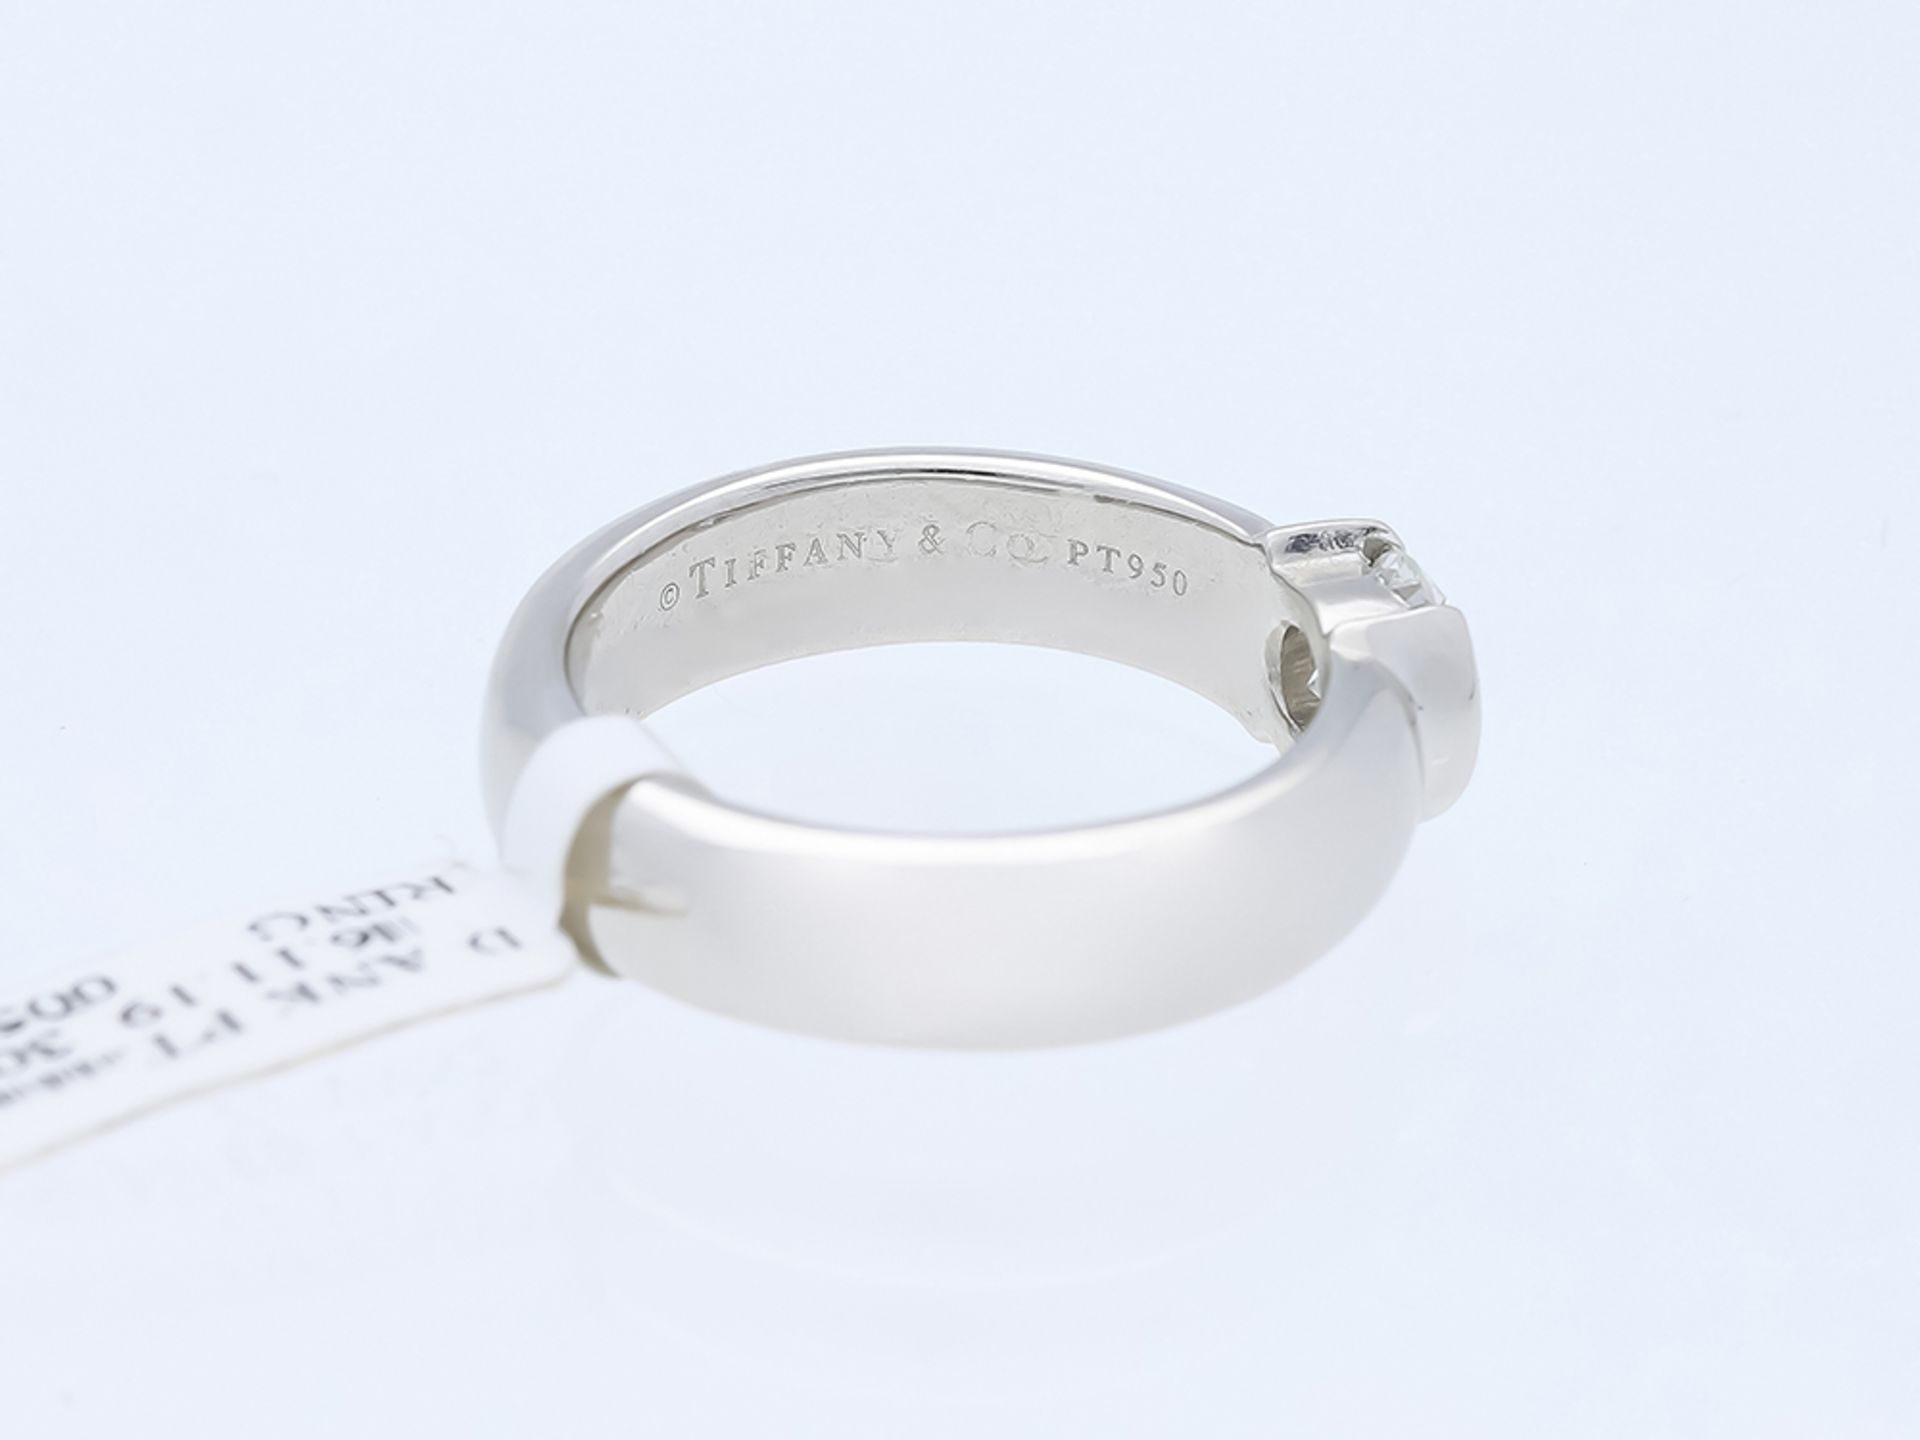 Tiffany & Co. ring in 950 platinum with solitaire diamonds, original case, gemological certificate - Image 3 of 6